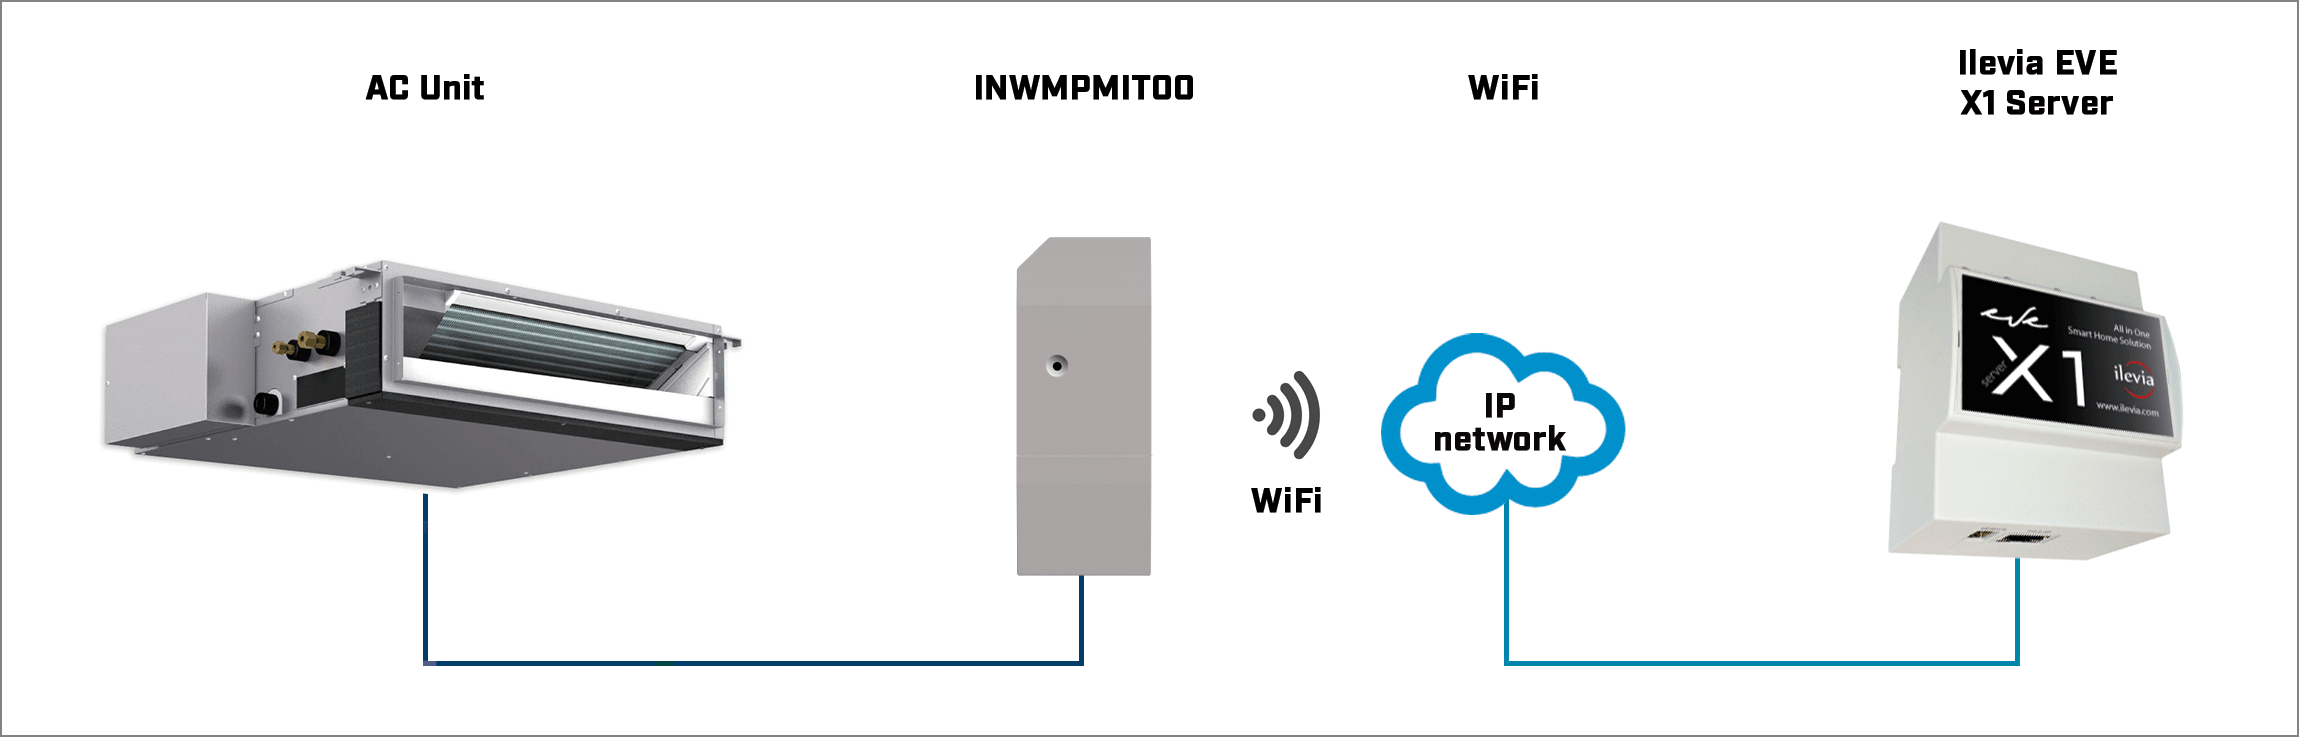 Intesis WiFi (ASCII) gateways enables full control of air conditioners from IP systems